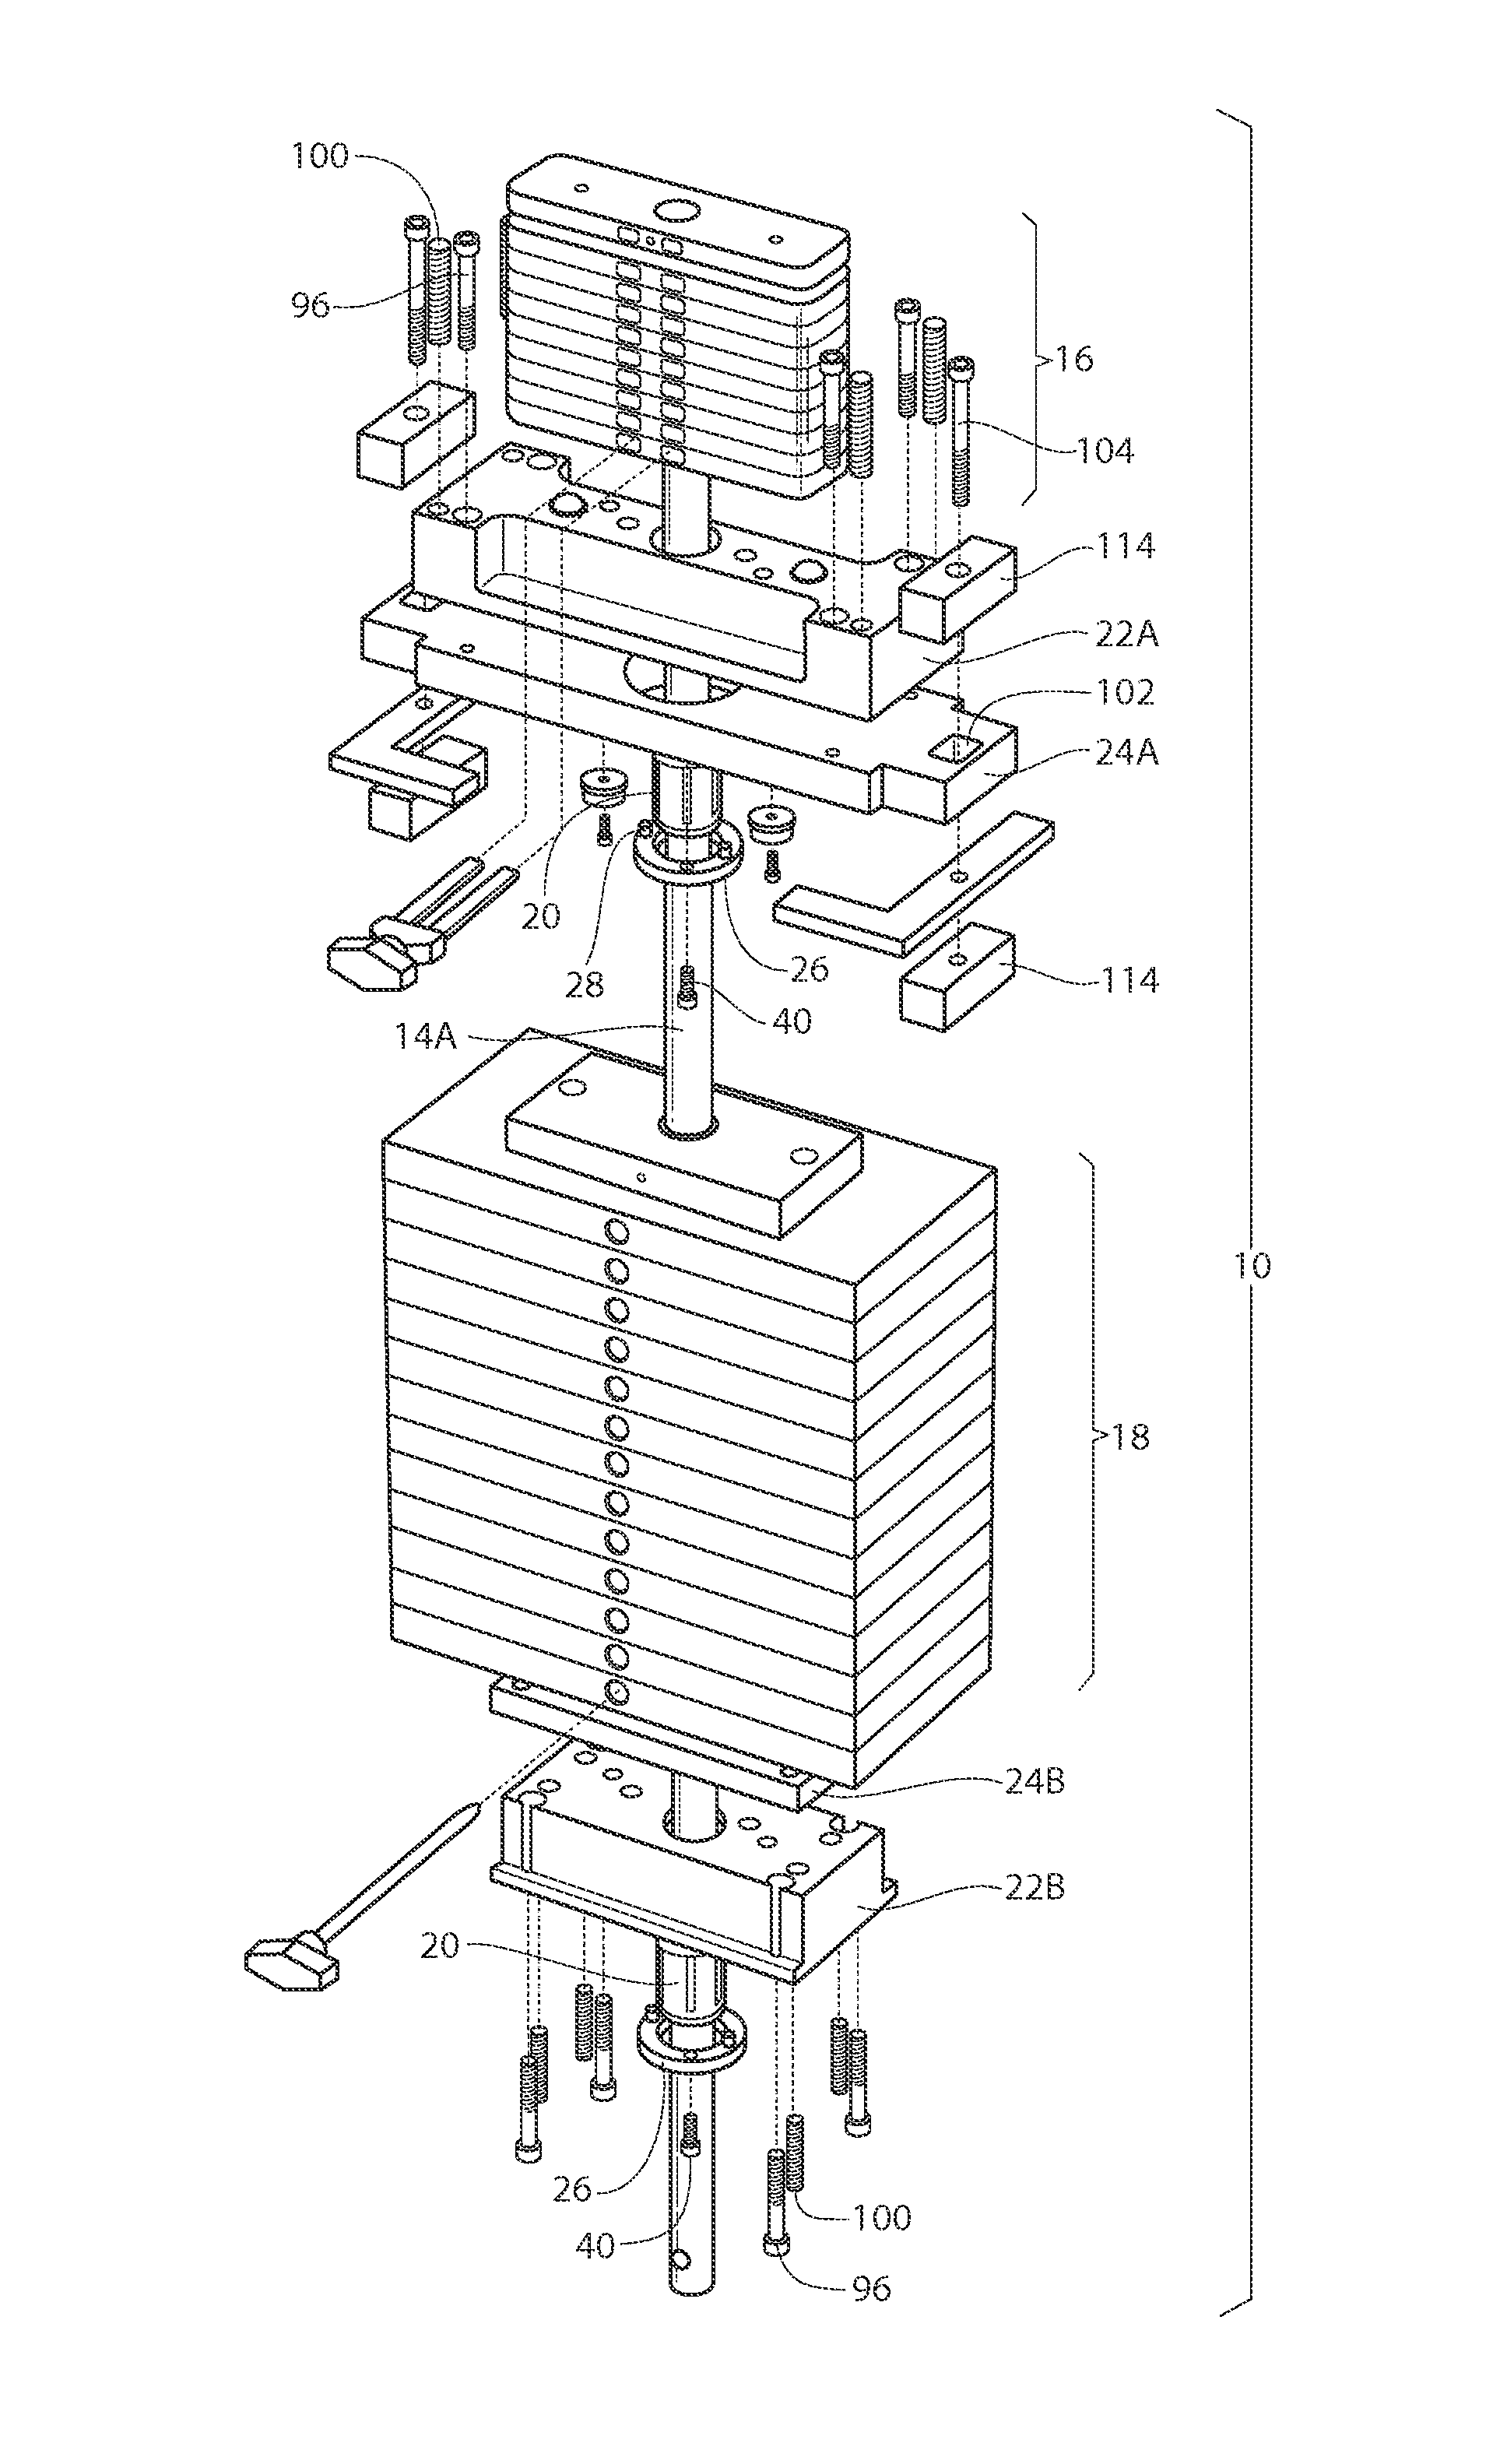 Linear bearings and alignment method for weight lifting apparatus